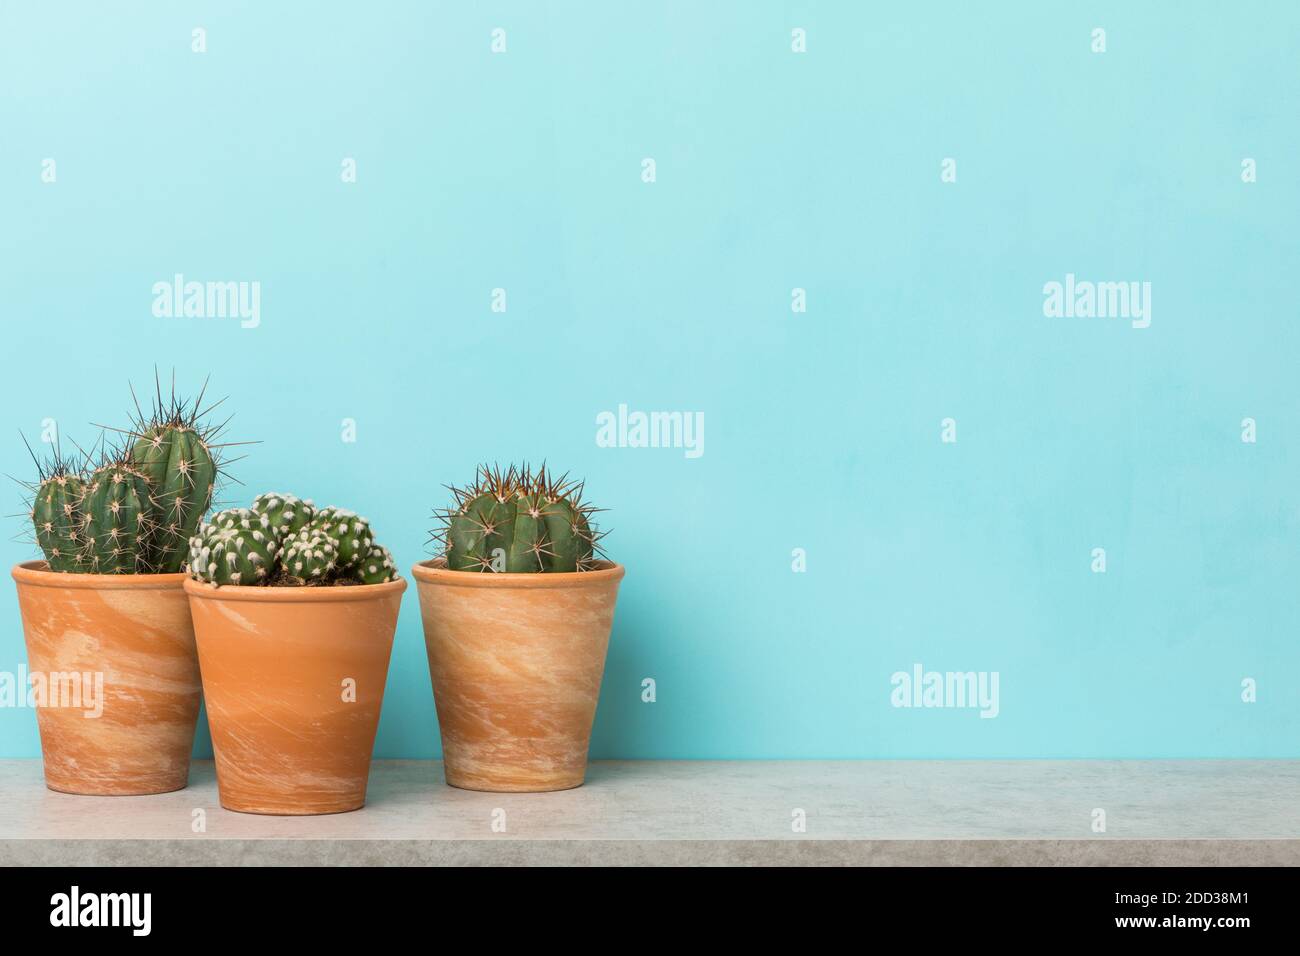 Three cactus plants in clay pots on a shelf with copy space on sky blue background Stock Photo